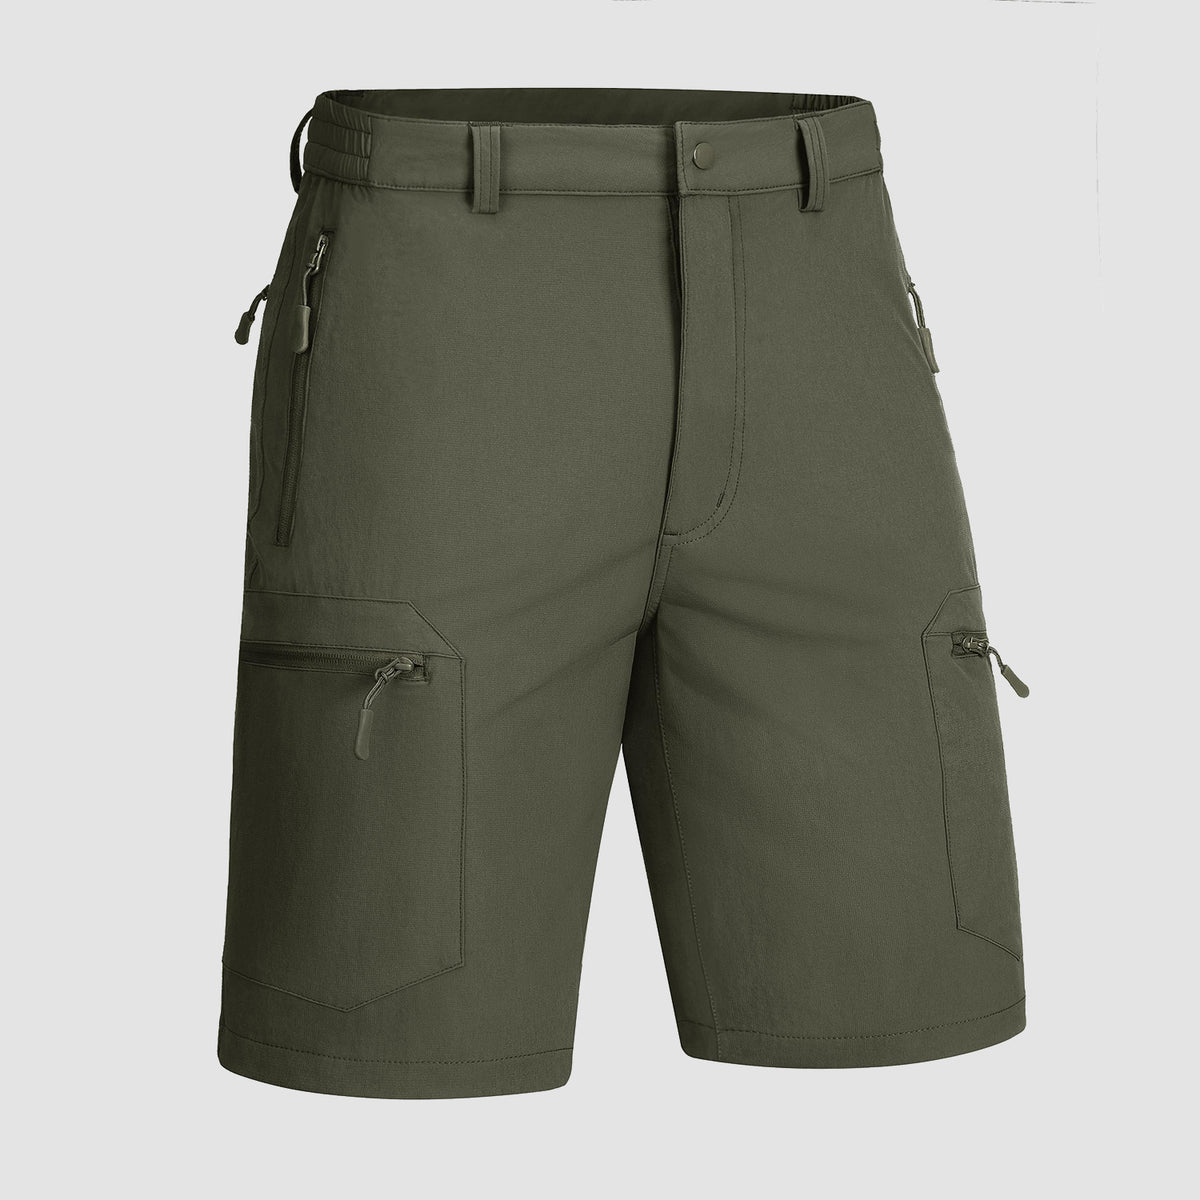 Men's Sports Shorts Water-Resistant Ripstop Shorts for Outdoors, Army Green / 32